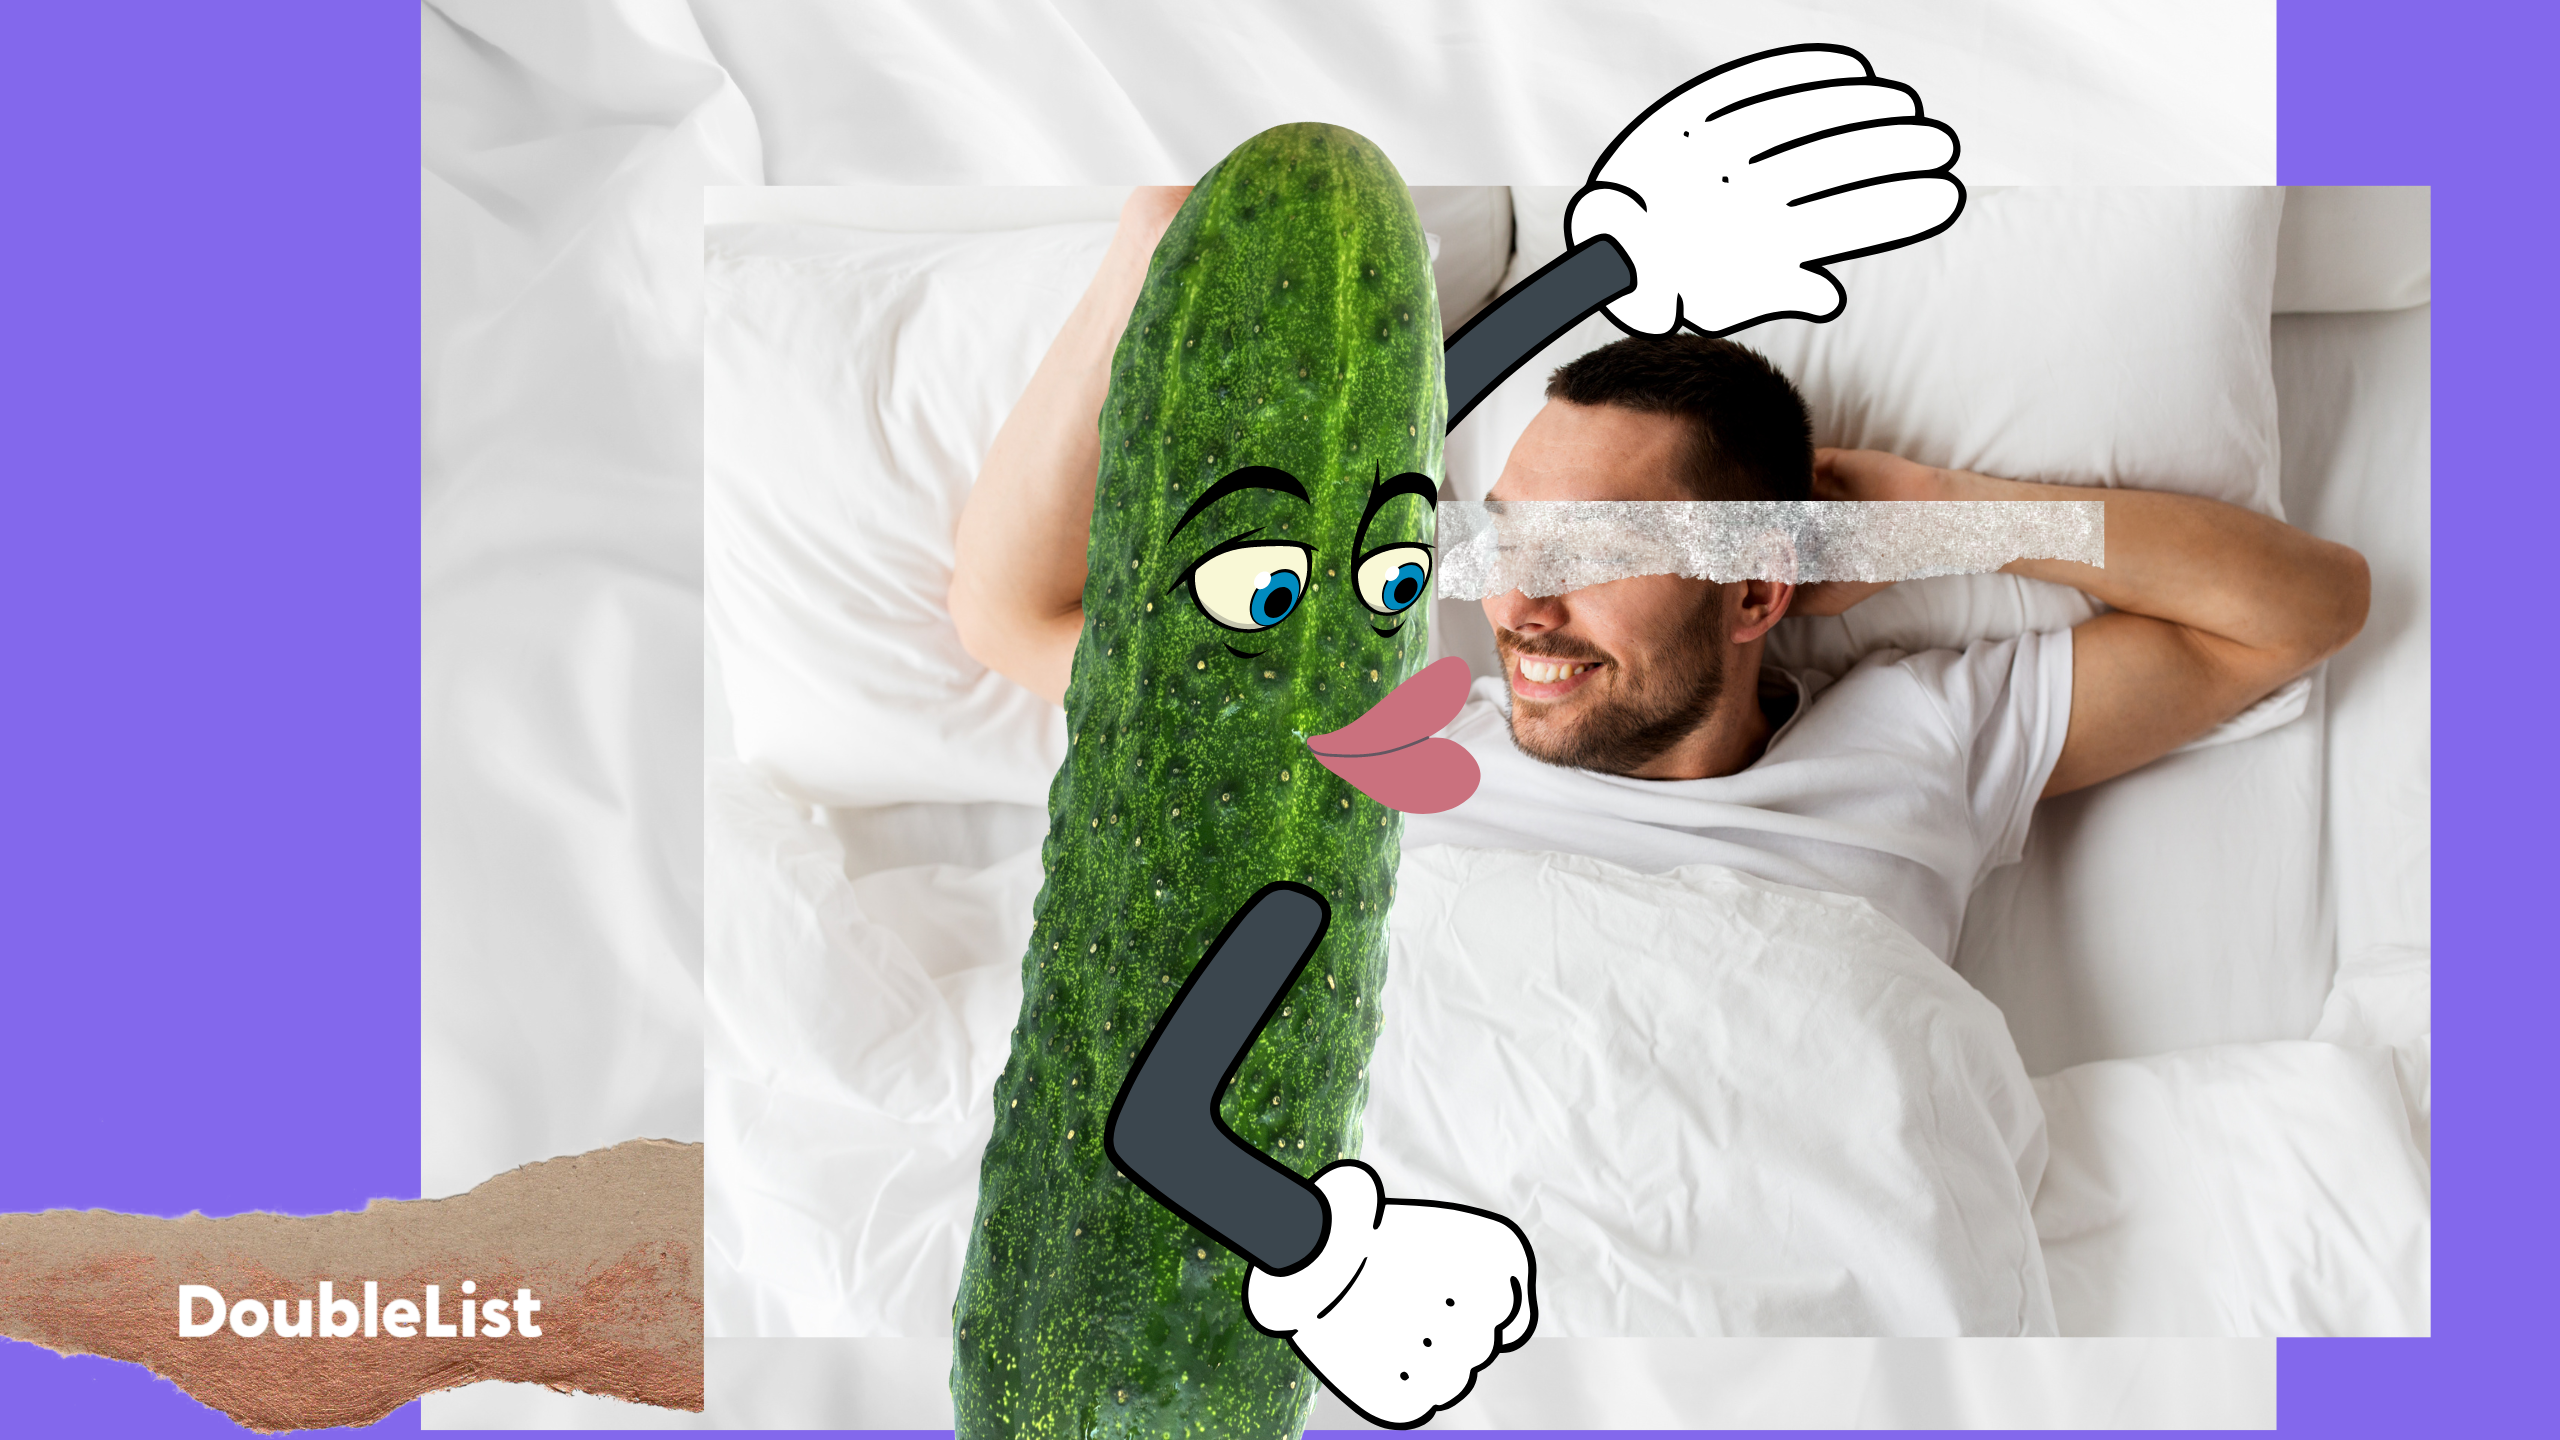 Man in bed with a cucumber